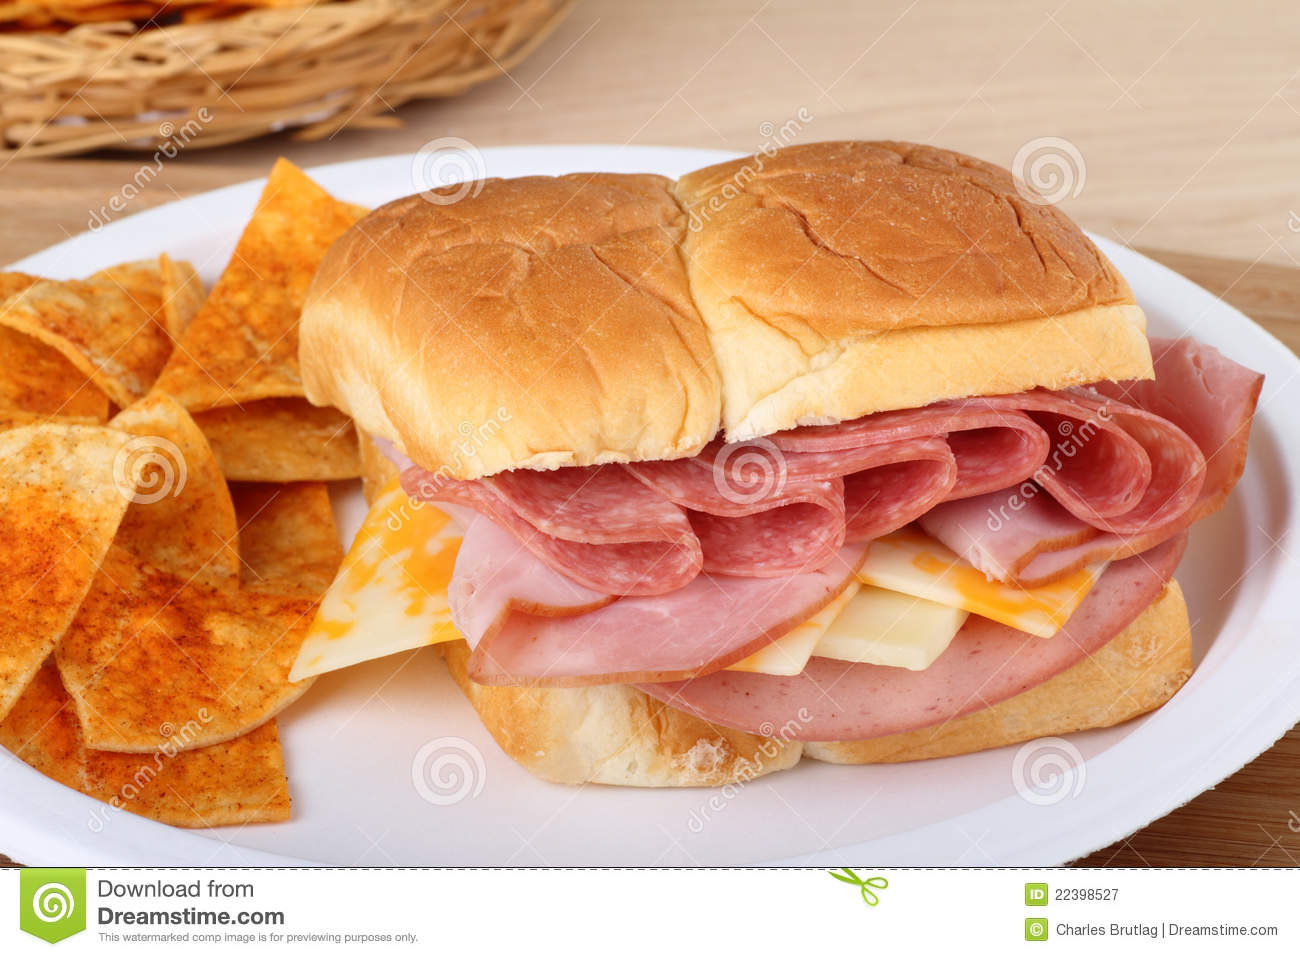 Lunch Meat And Cheese Sandwich Royalty Free Stock Photography   Image